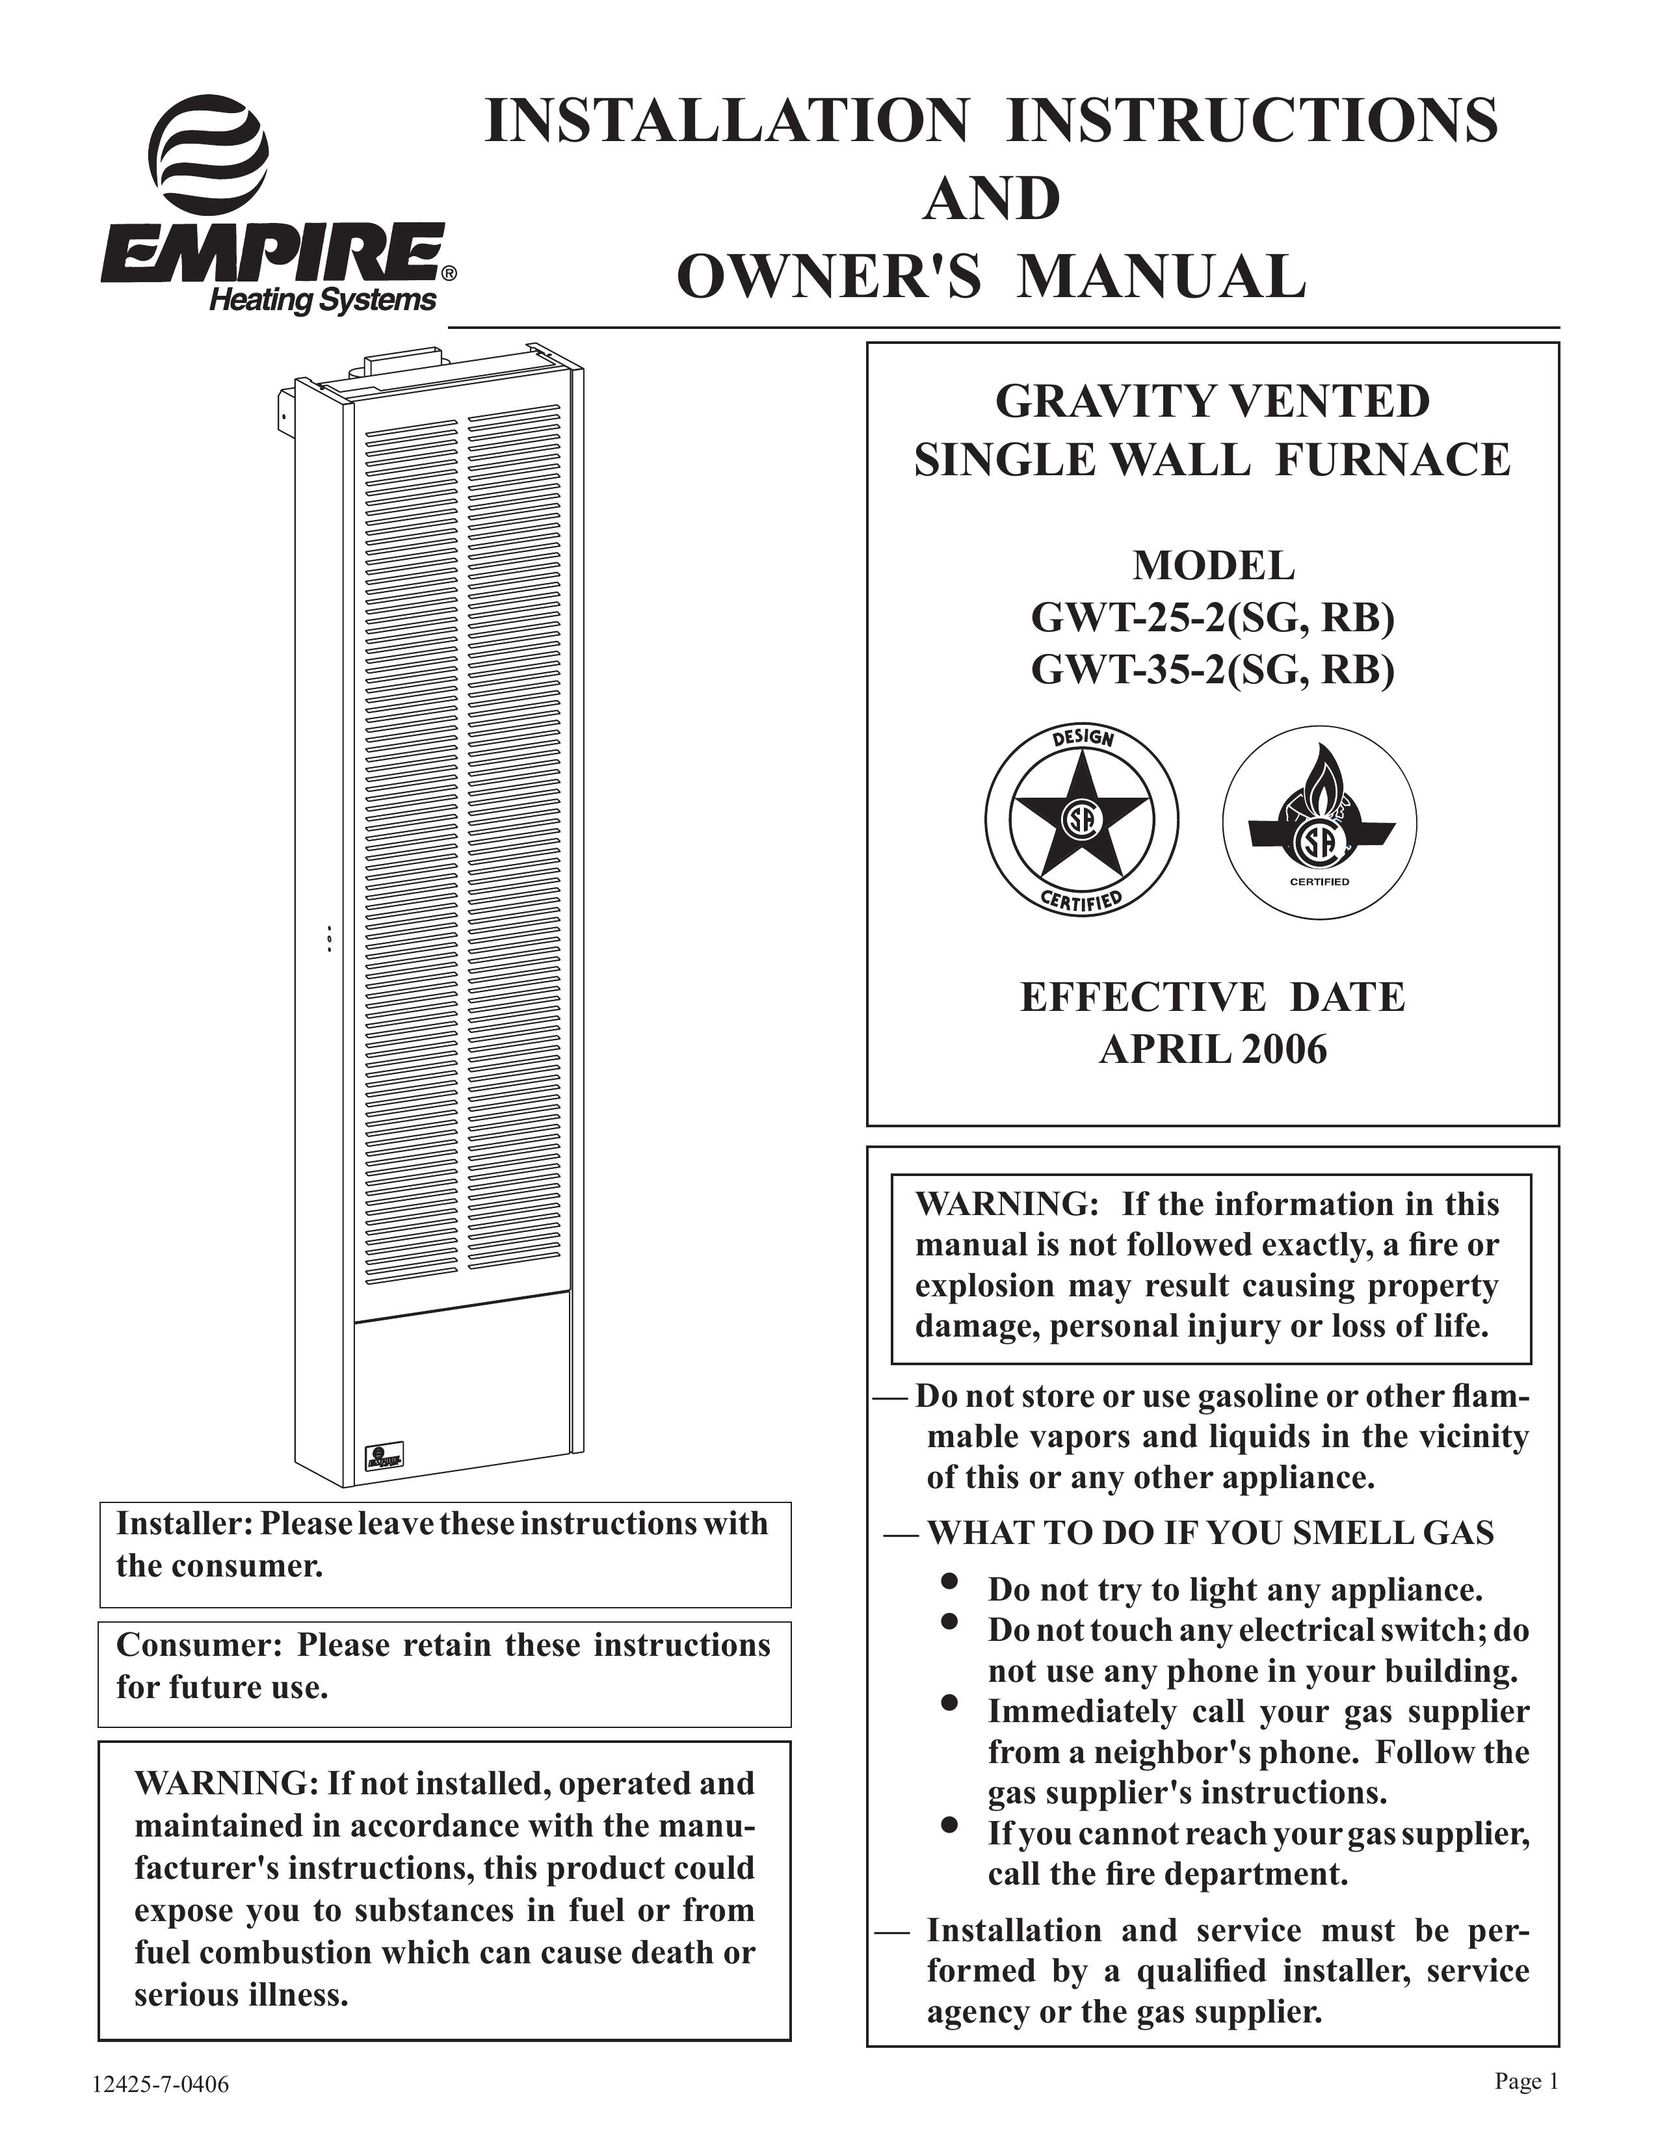 Empire Products GWT-25-2 Furnace User Manual